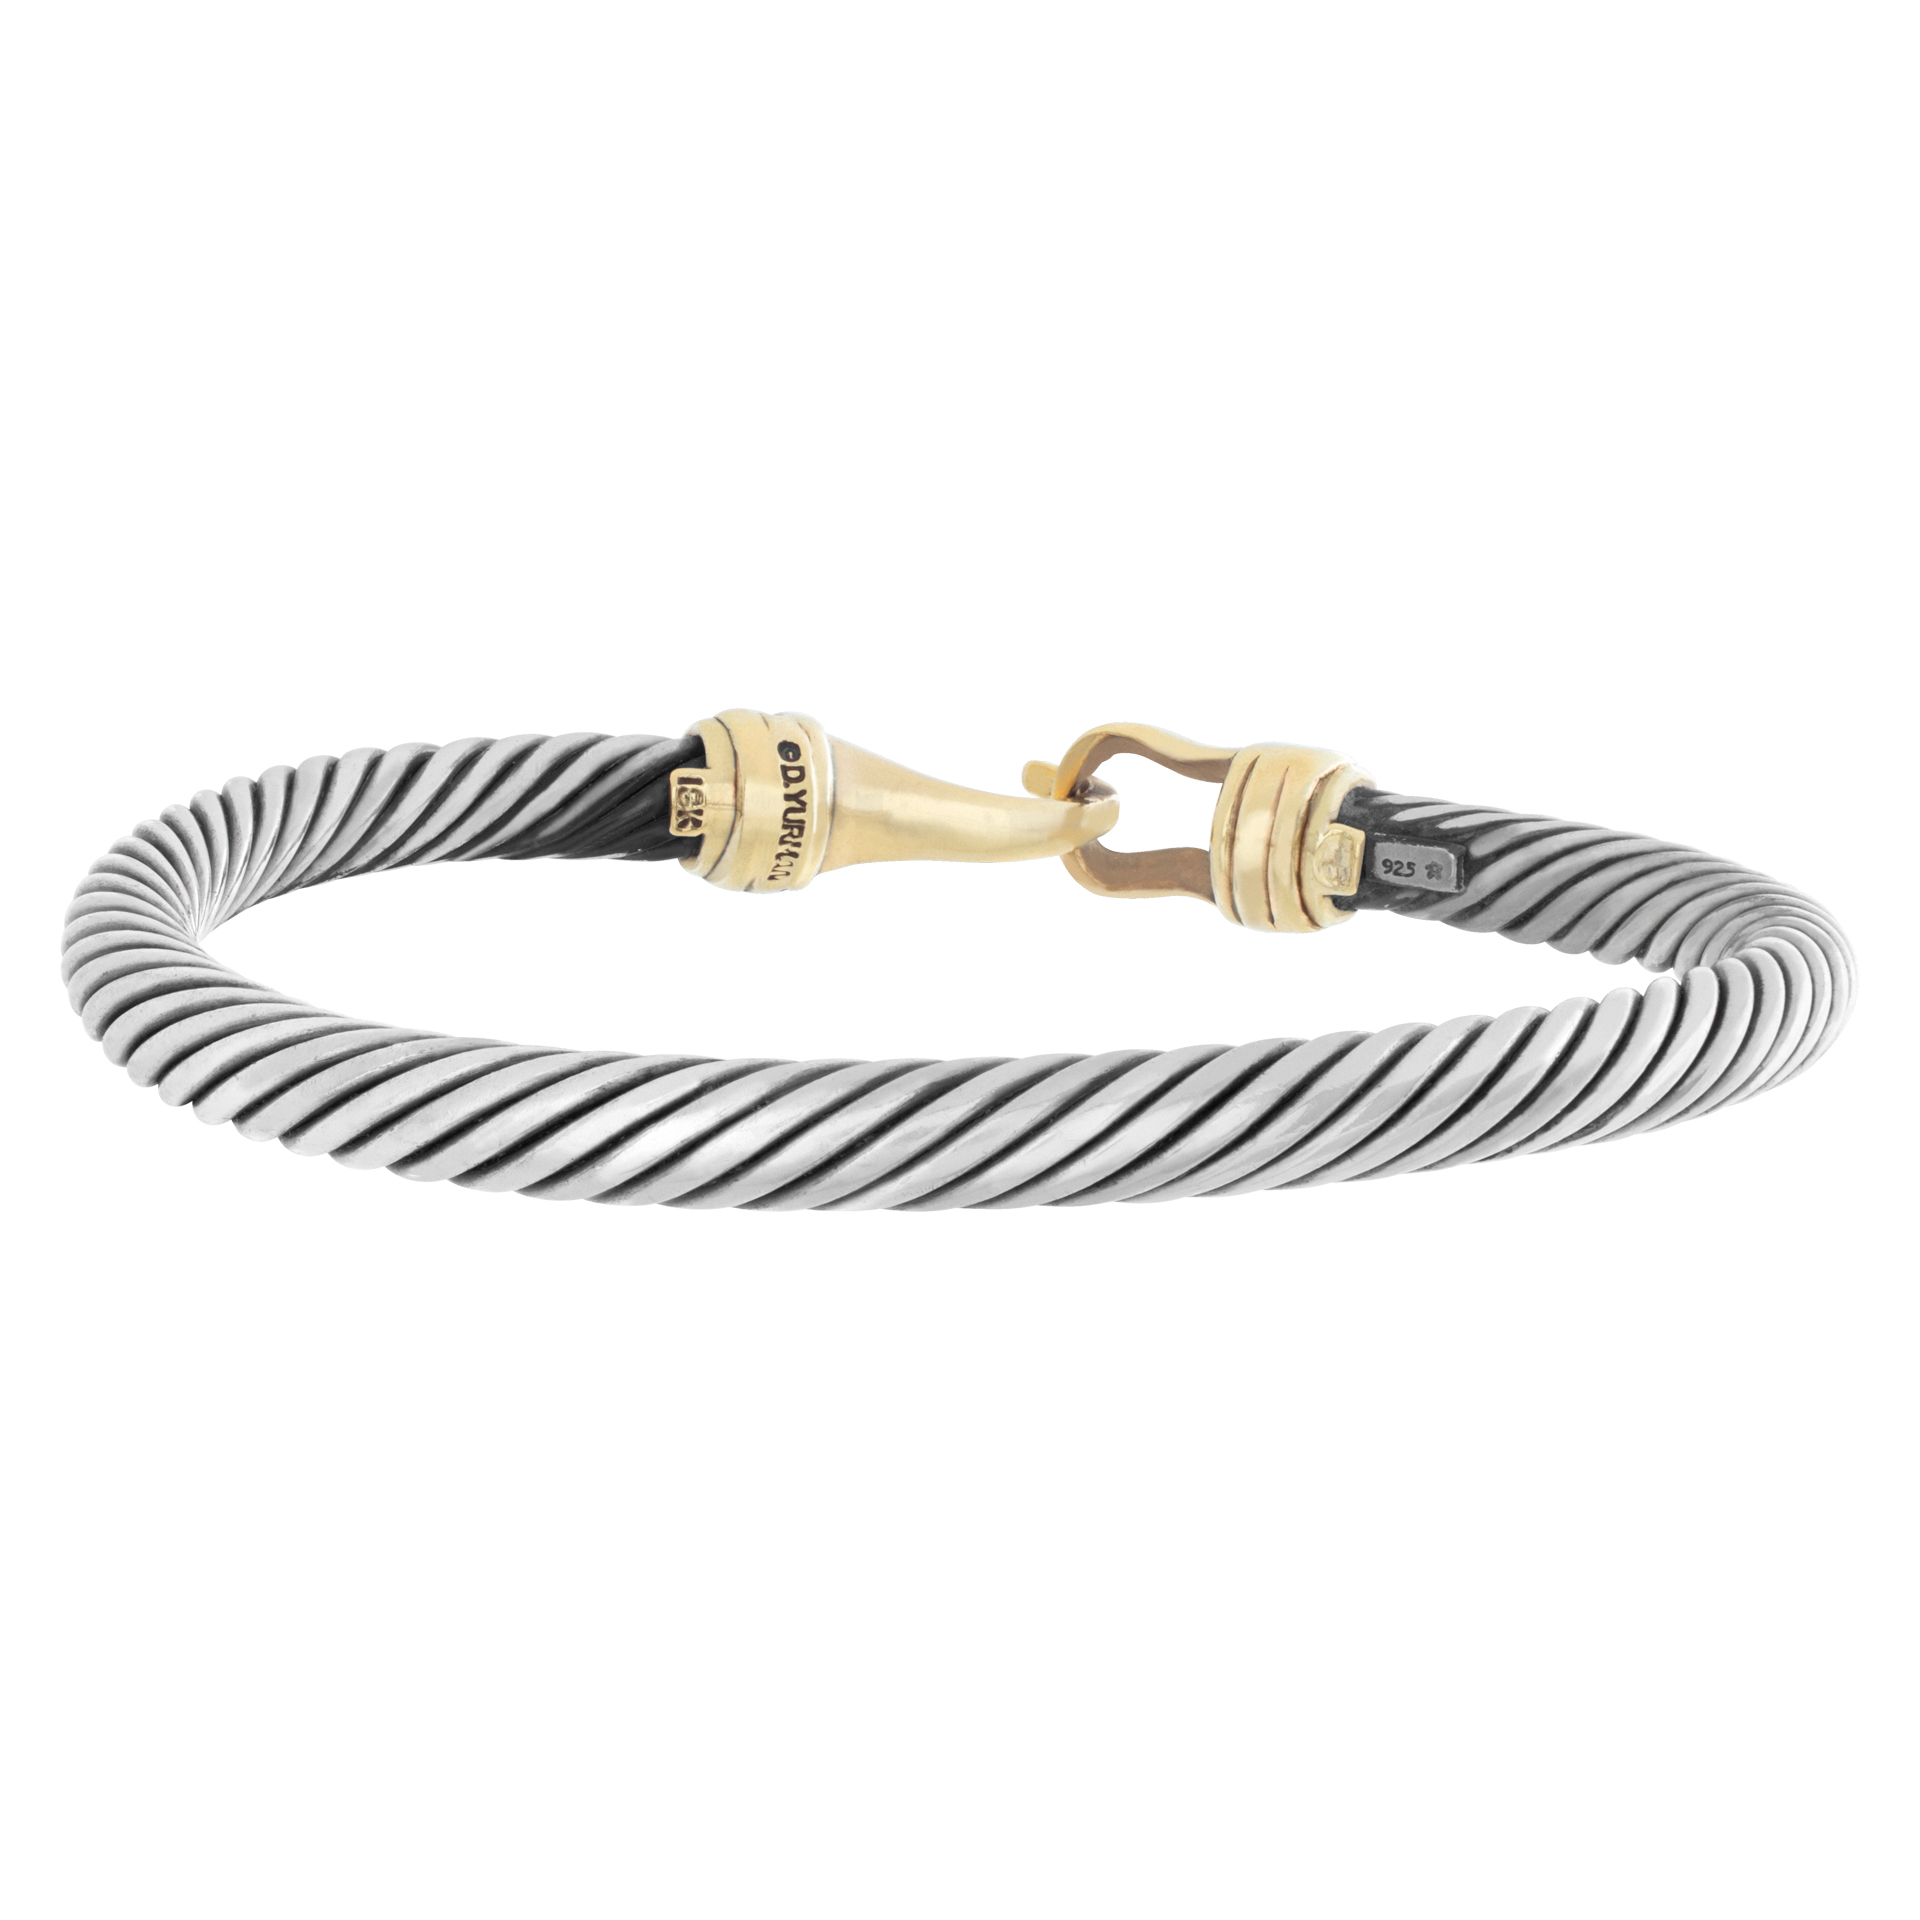 David Yurman Bangle In Sterling Silver And 18k Yellow Gold With Diamond Accents